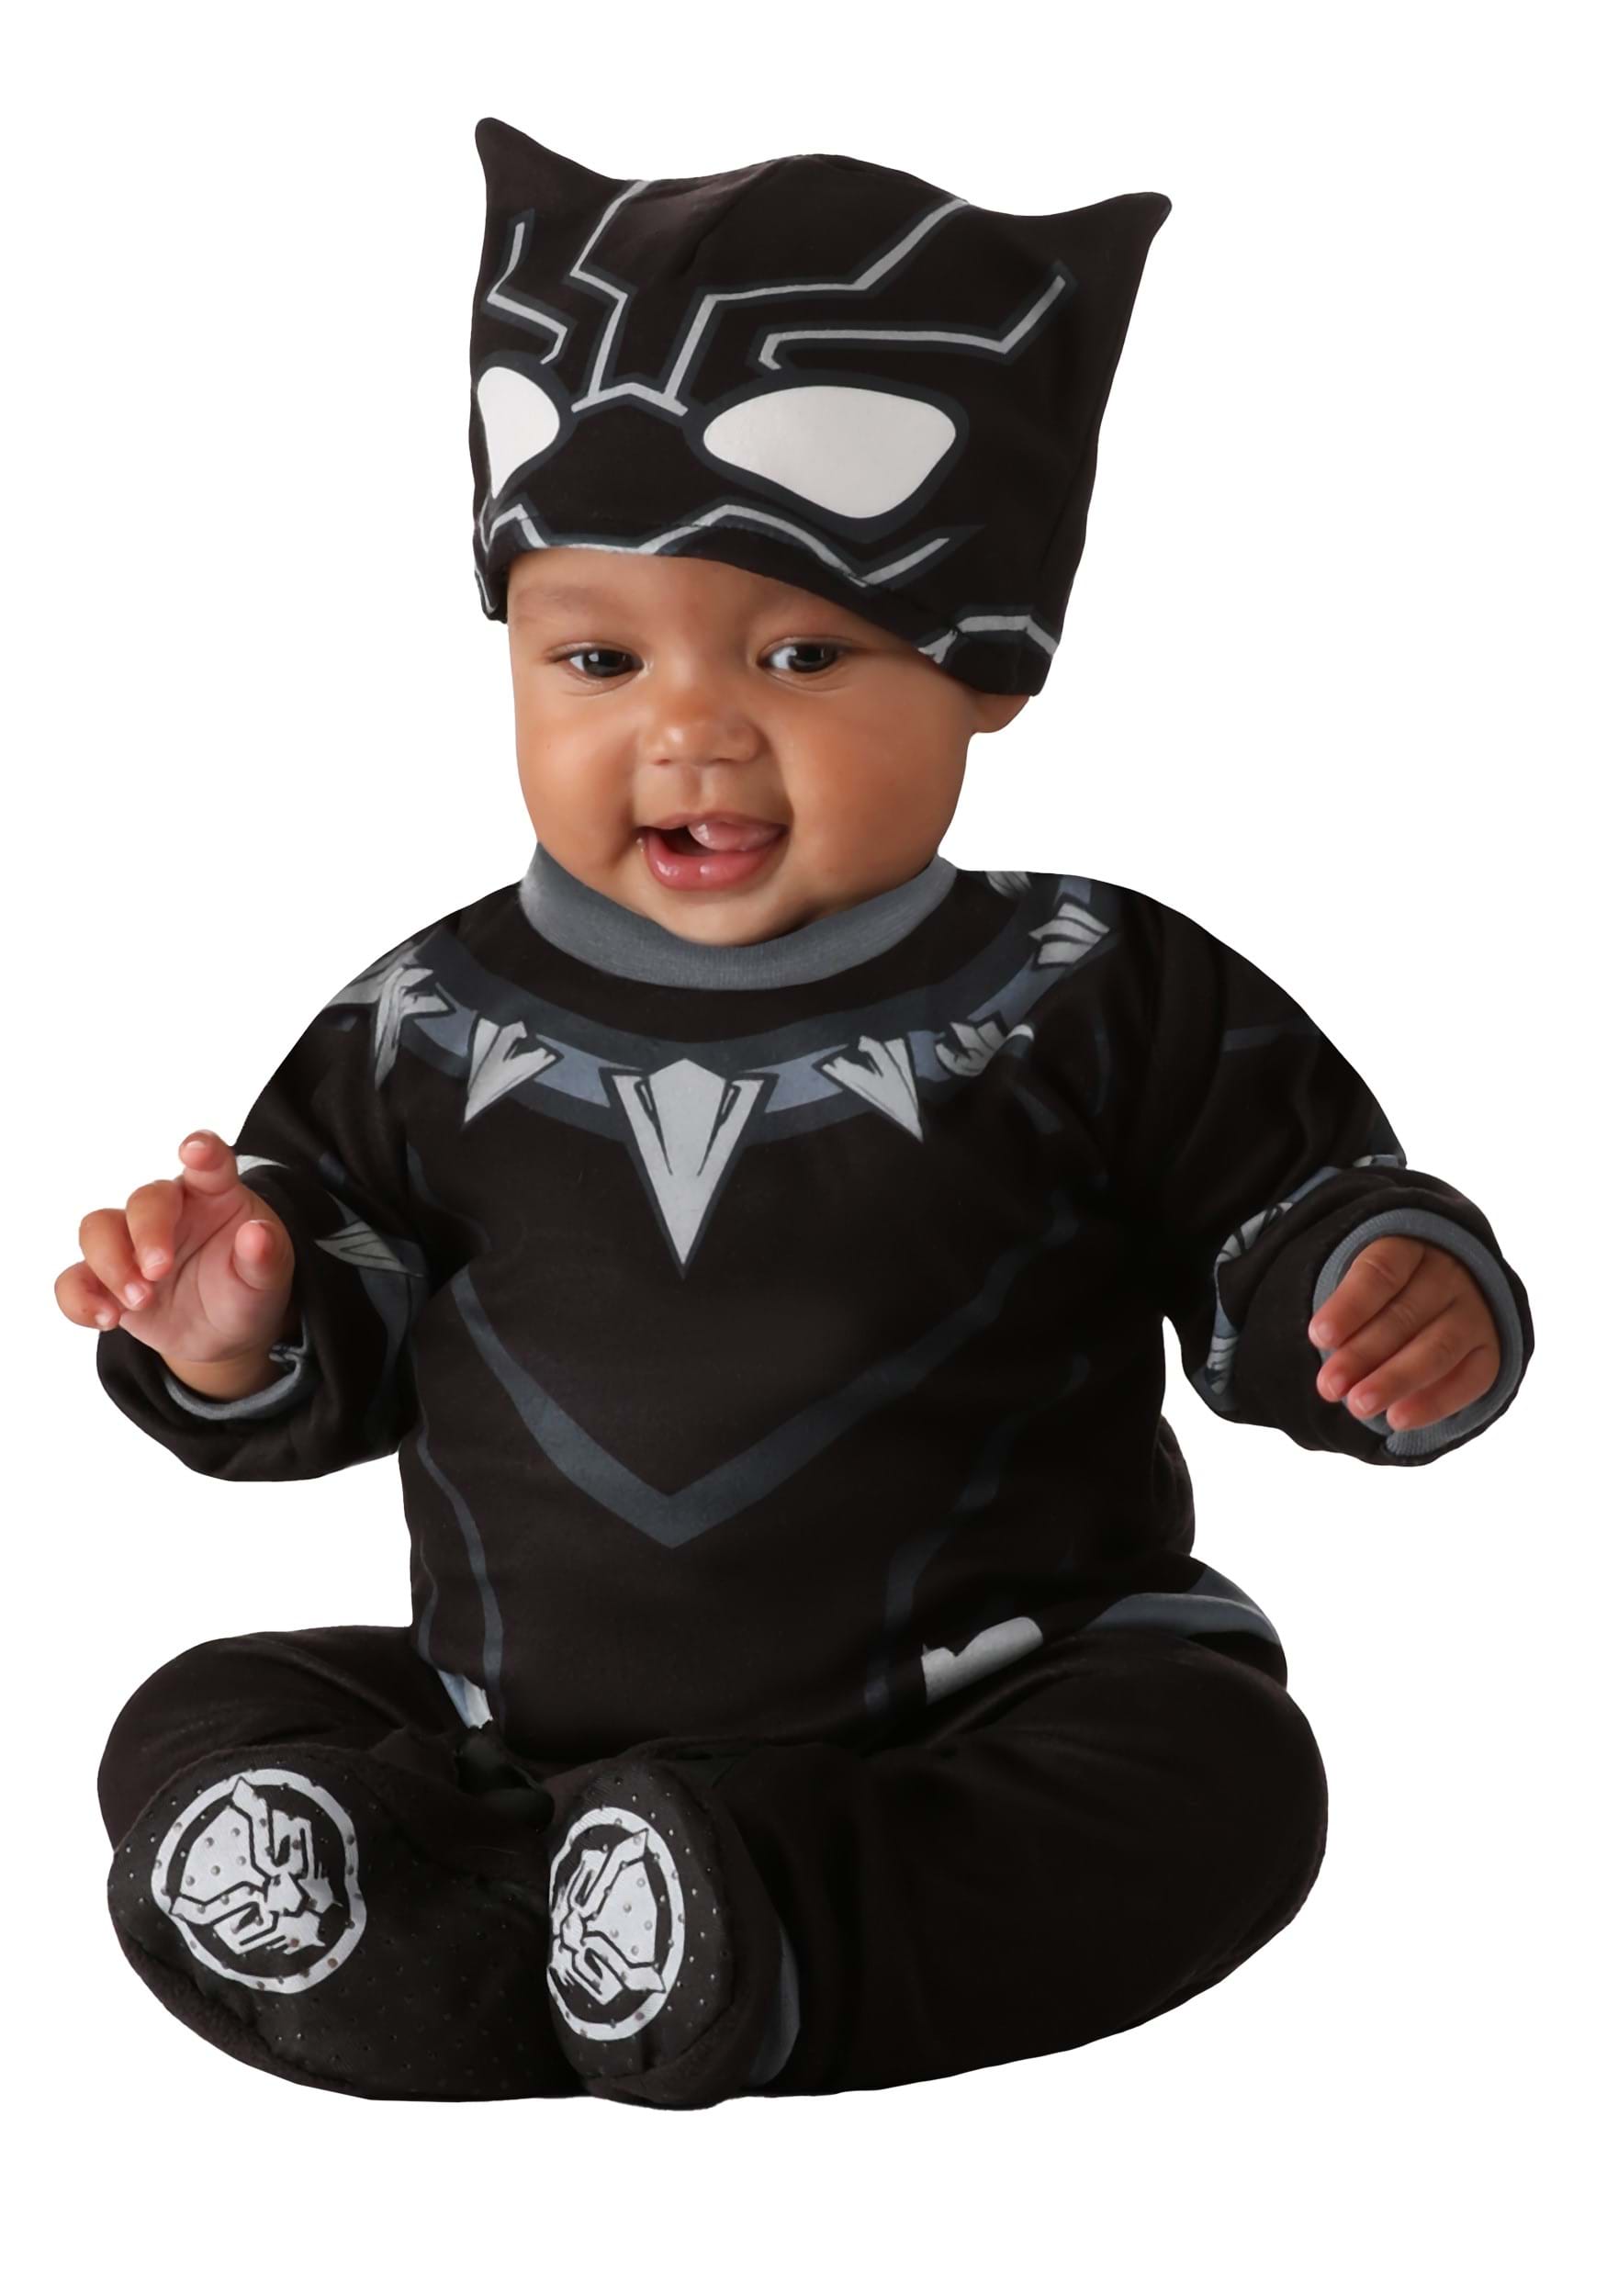 Marvel Avengers Black Panther Little Girls Cosplay T-Shirt Dress and Leggings  Outfit Set 